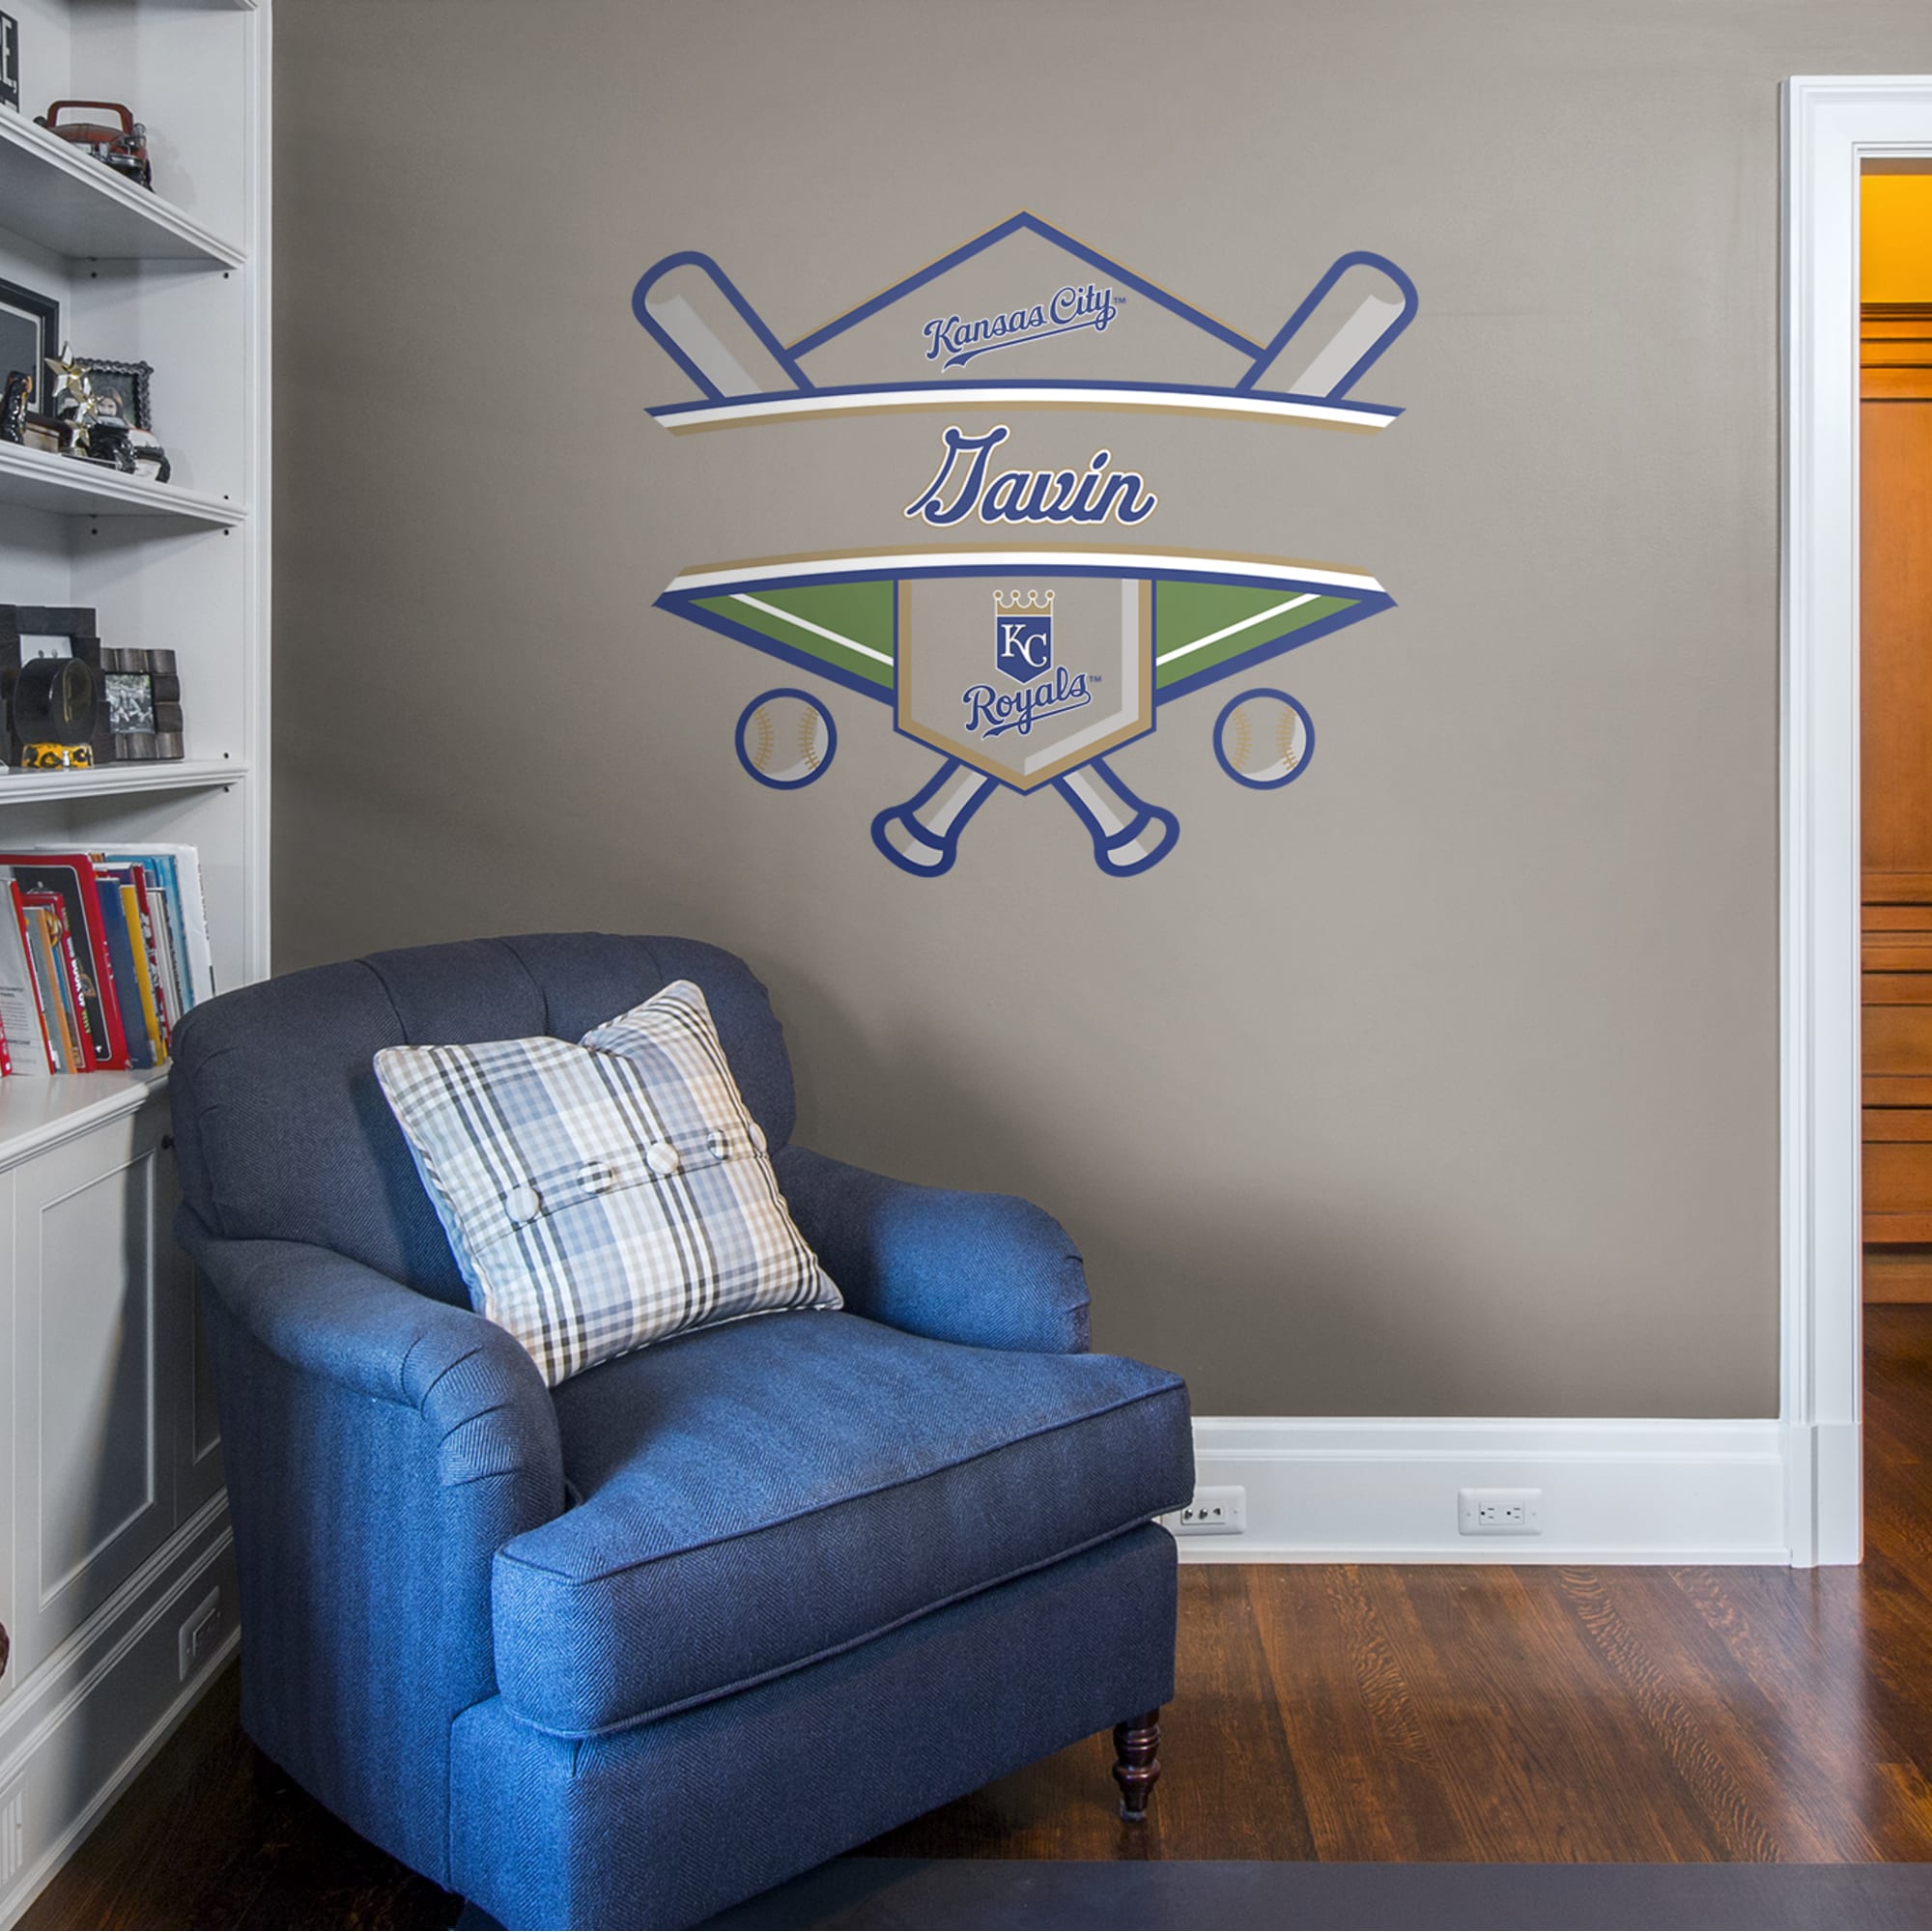 Kansas City Royals: Personalized Name - Officially Licensed MLB Transfer Decal 45.0"W x 39.0"H by Fathead | Vinyl